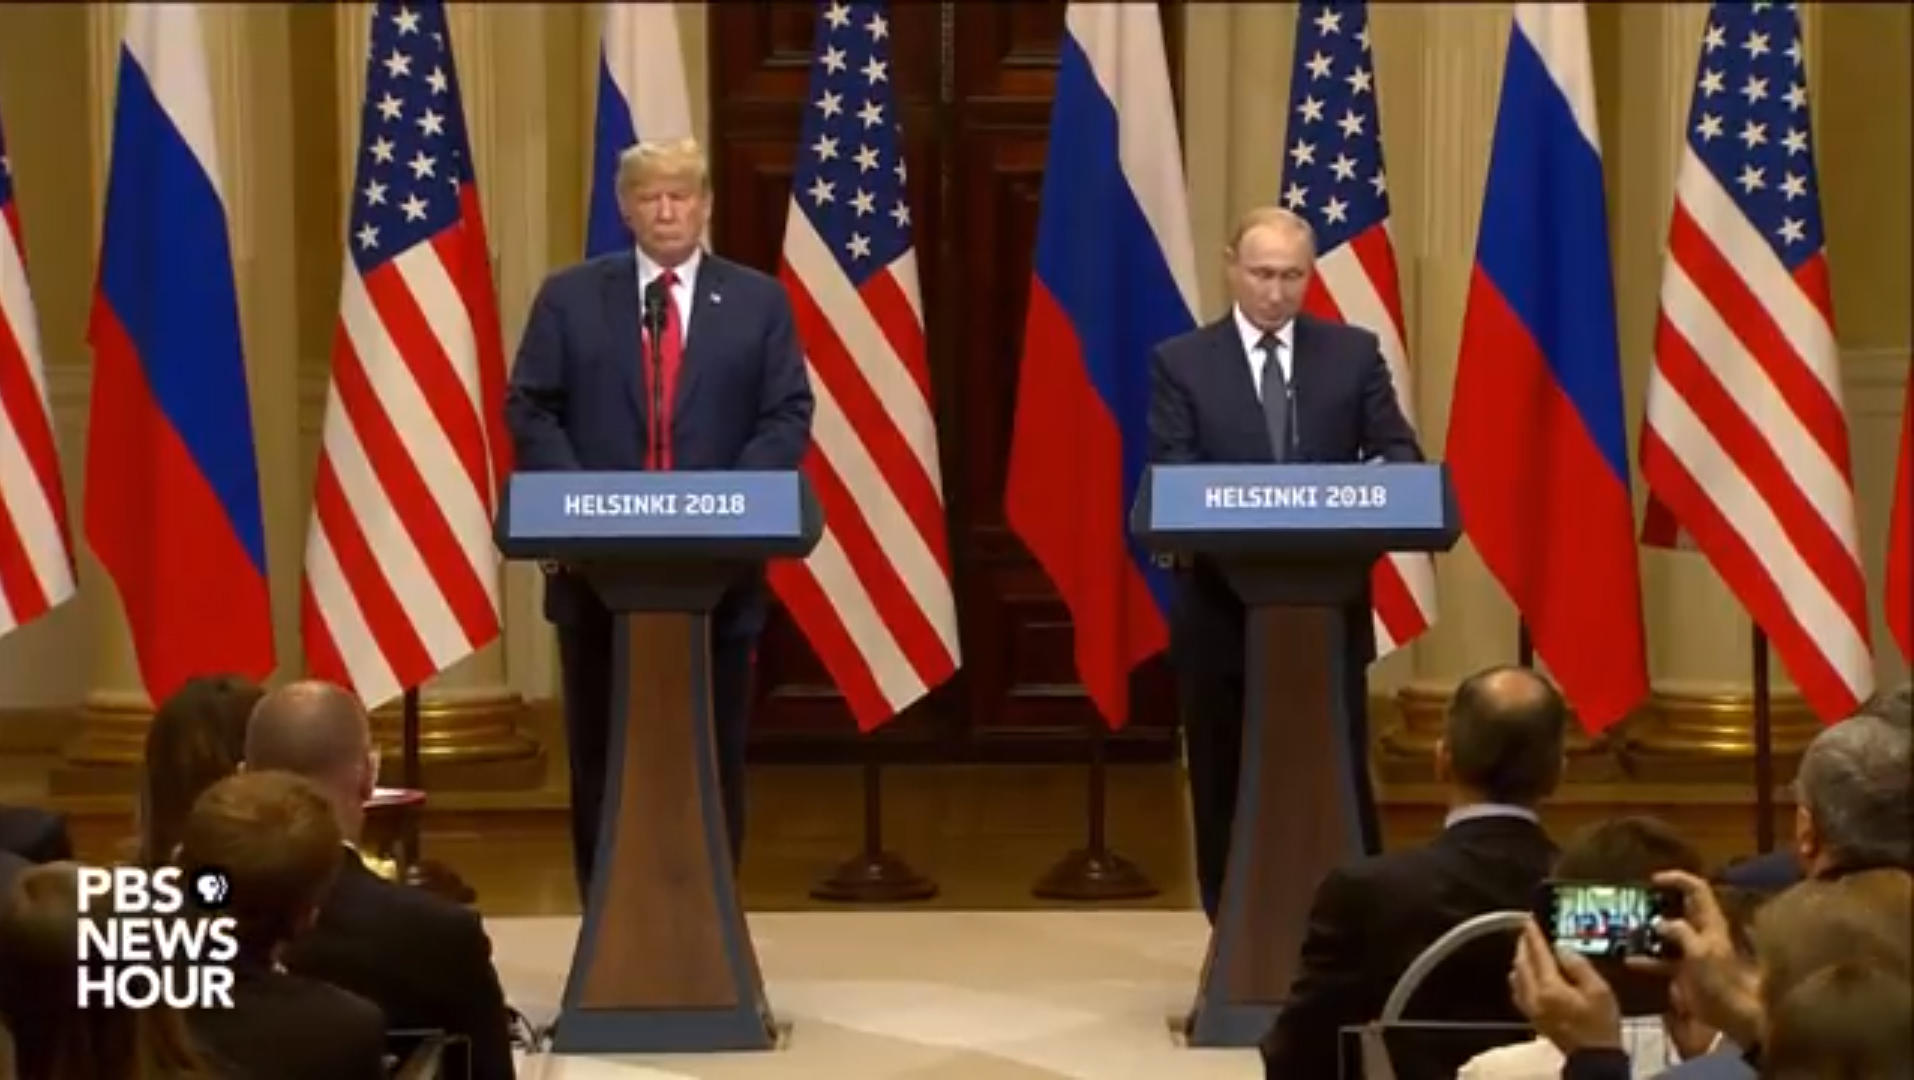 Live Video Trump And Putin Joint News Conference Wjct News 0590